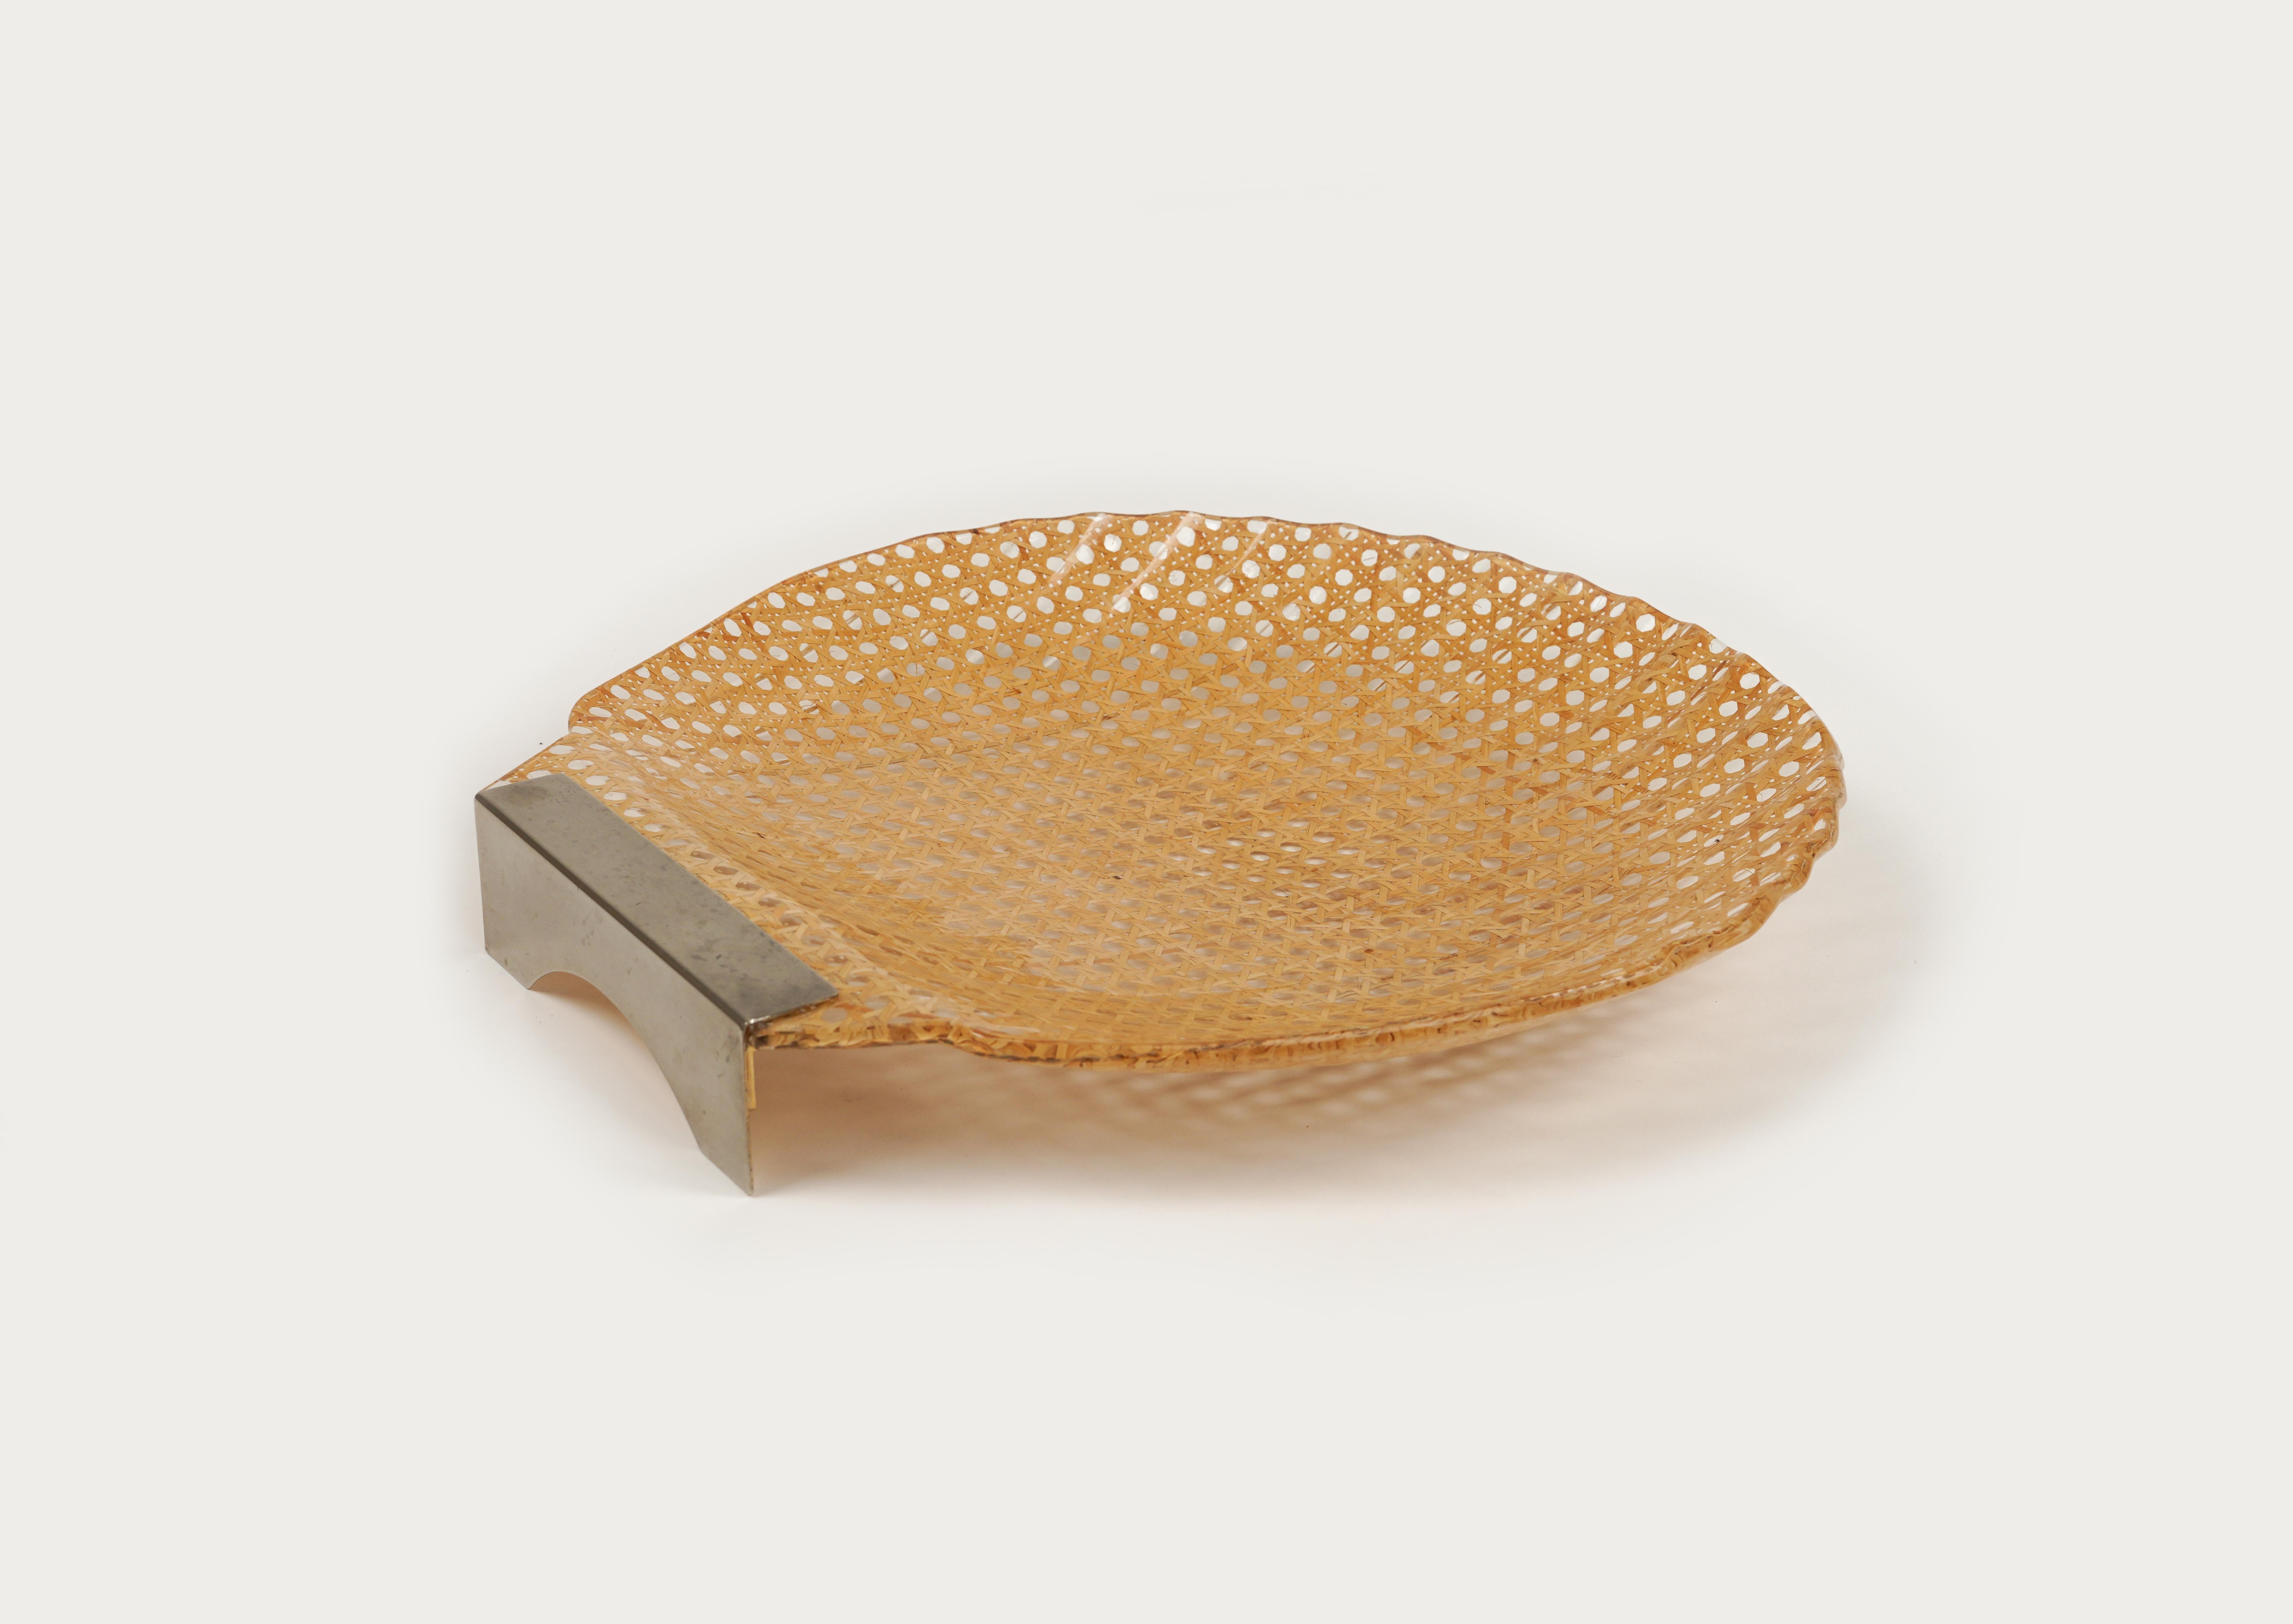 Shell Serving Tray Lucite and Rattan Christian Dior Style, France, 1970s For Sale 3